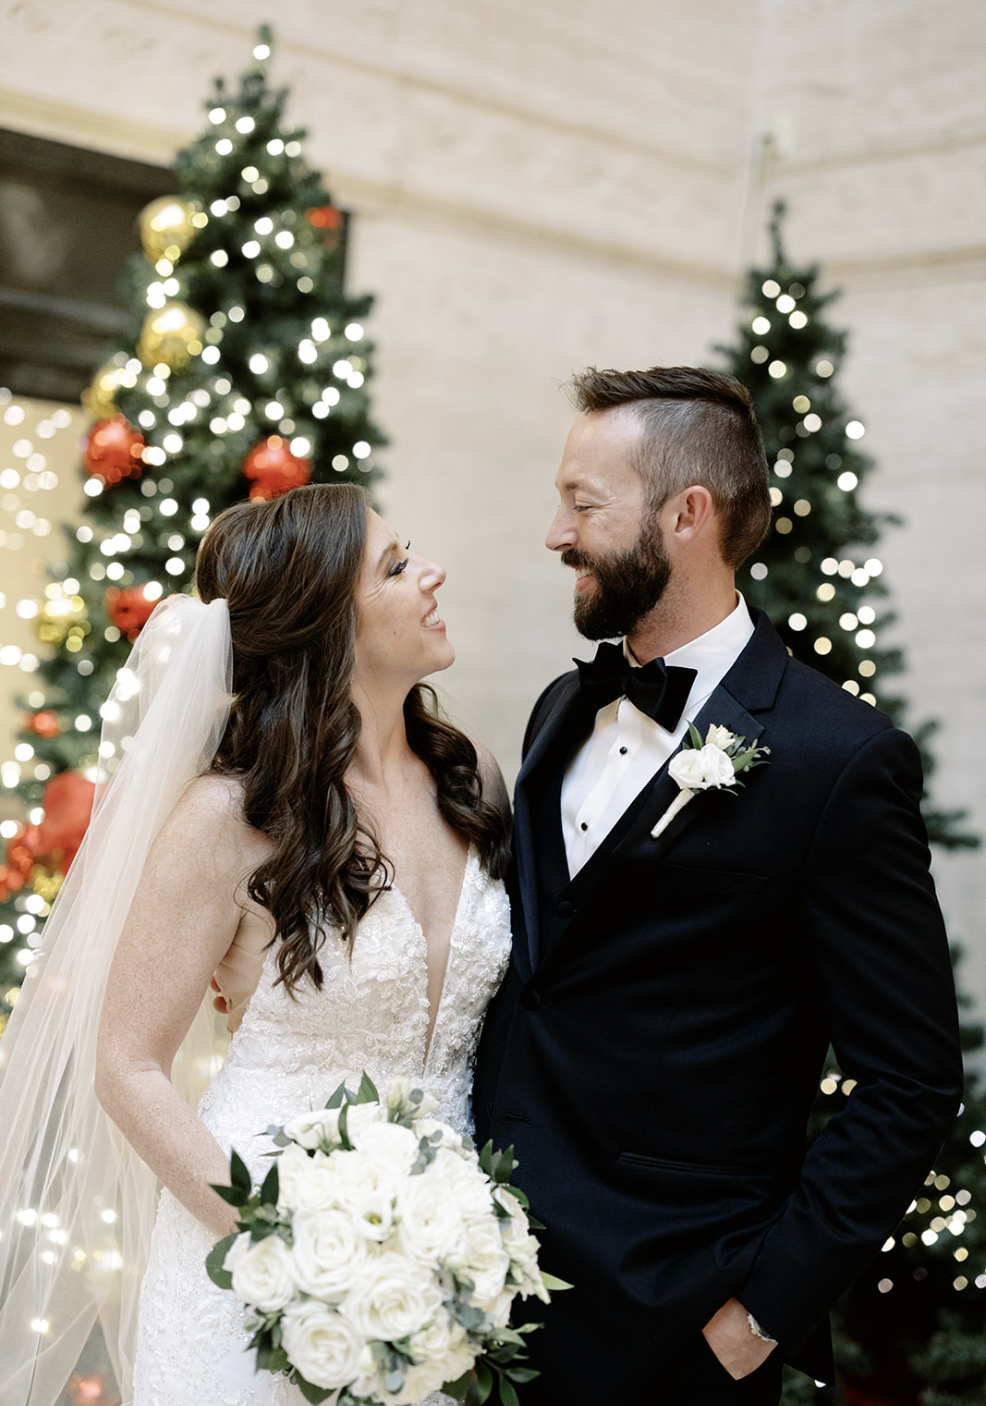 Bride with brown curly hair holds bouquet of white roses and smiles at husband wearing a black tuxedo in front of Chirstmas trees at Harold Washington Library wedding reception.